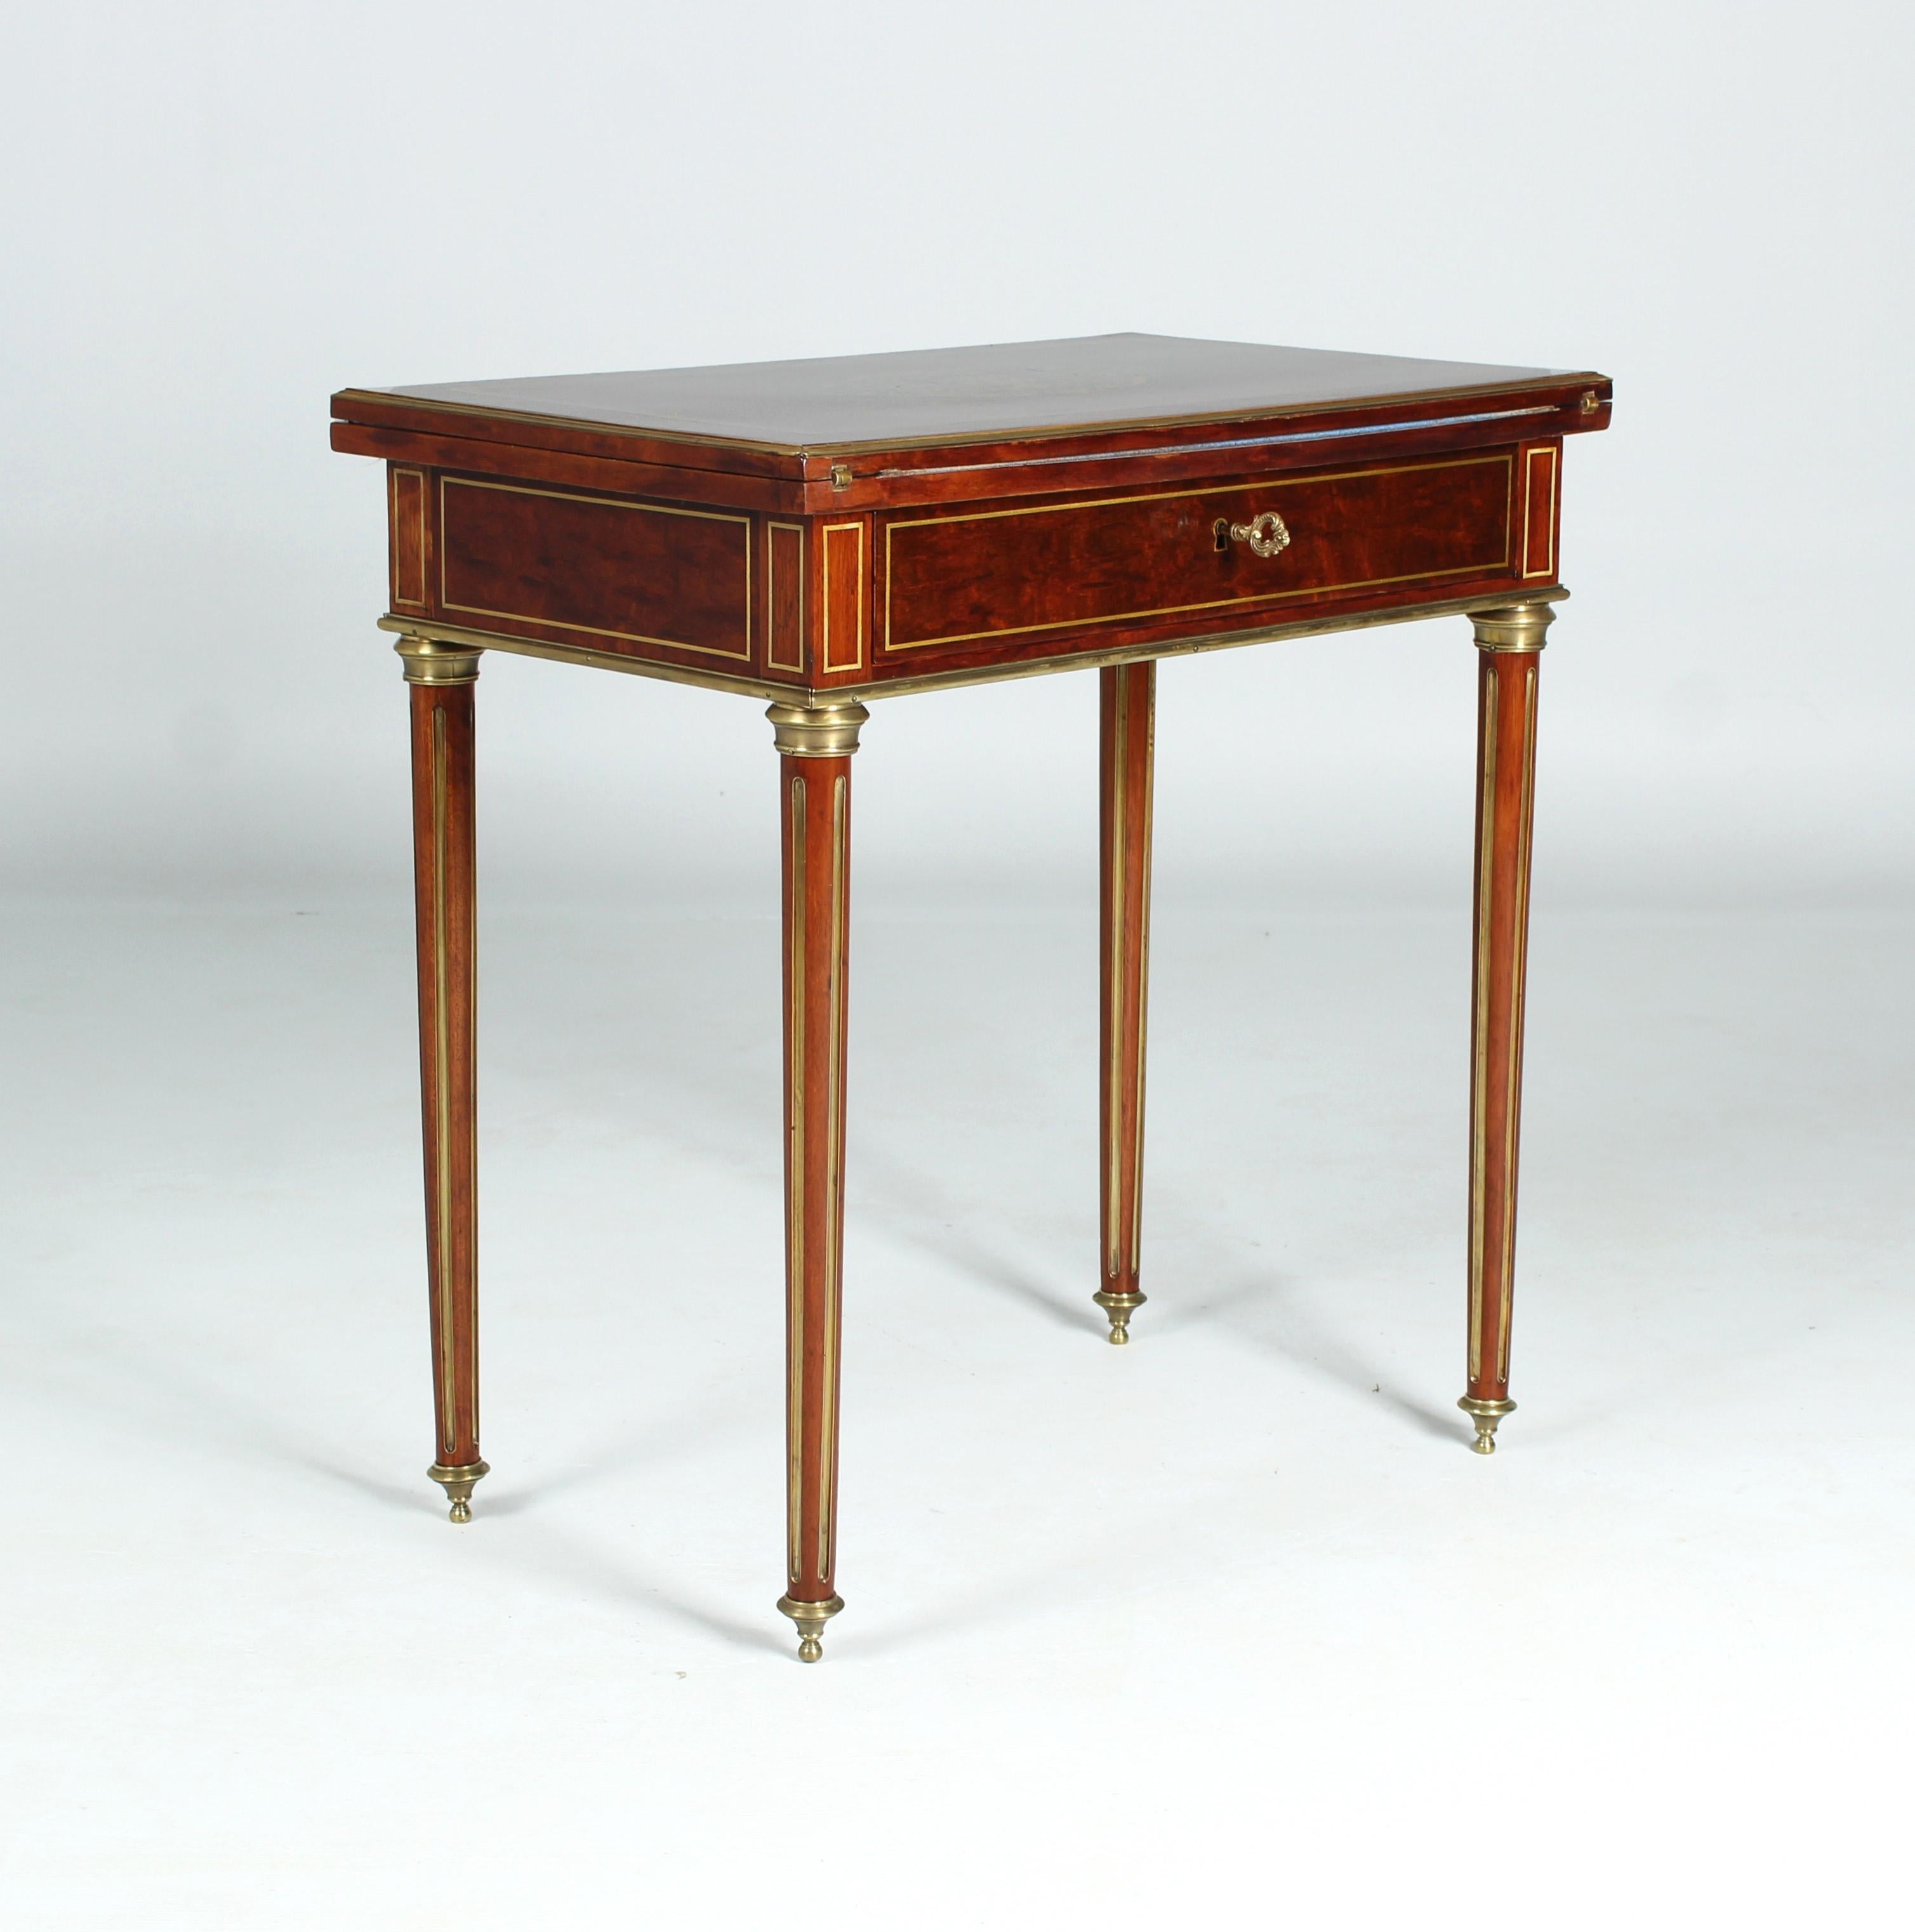 Small antique desk, dressing table or game table

France
Wood, brass
Around 1870

Dimensions: H x W x D: 73 x 70 x 44 cm

Description:
Rare French transformation furniture in Louis XVI style from the so-called Napoleon III era.

In the